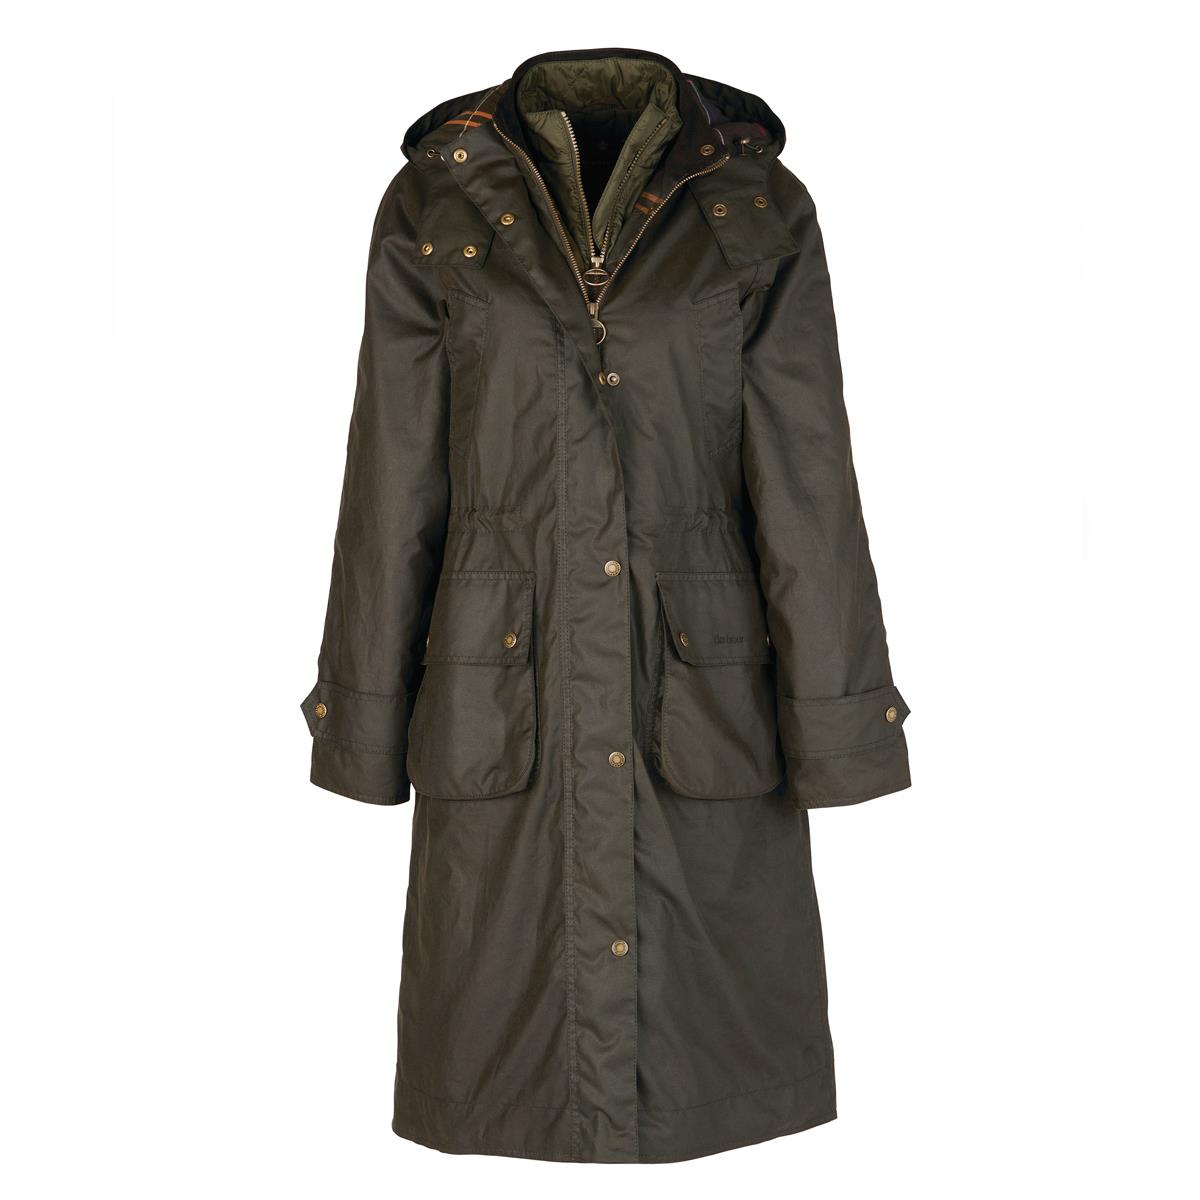 What are the specs of the Barbour Cannich Wax Jacket?